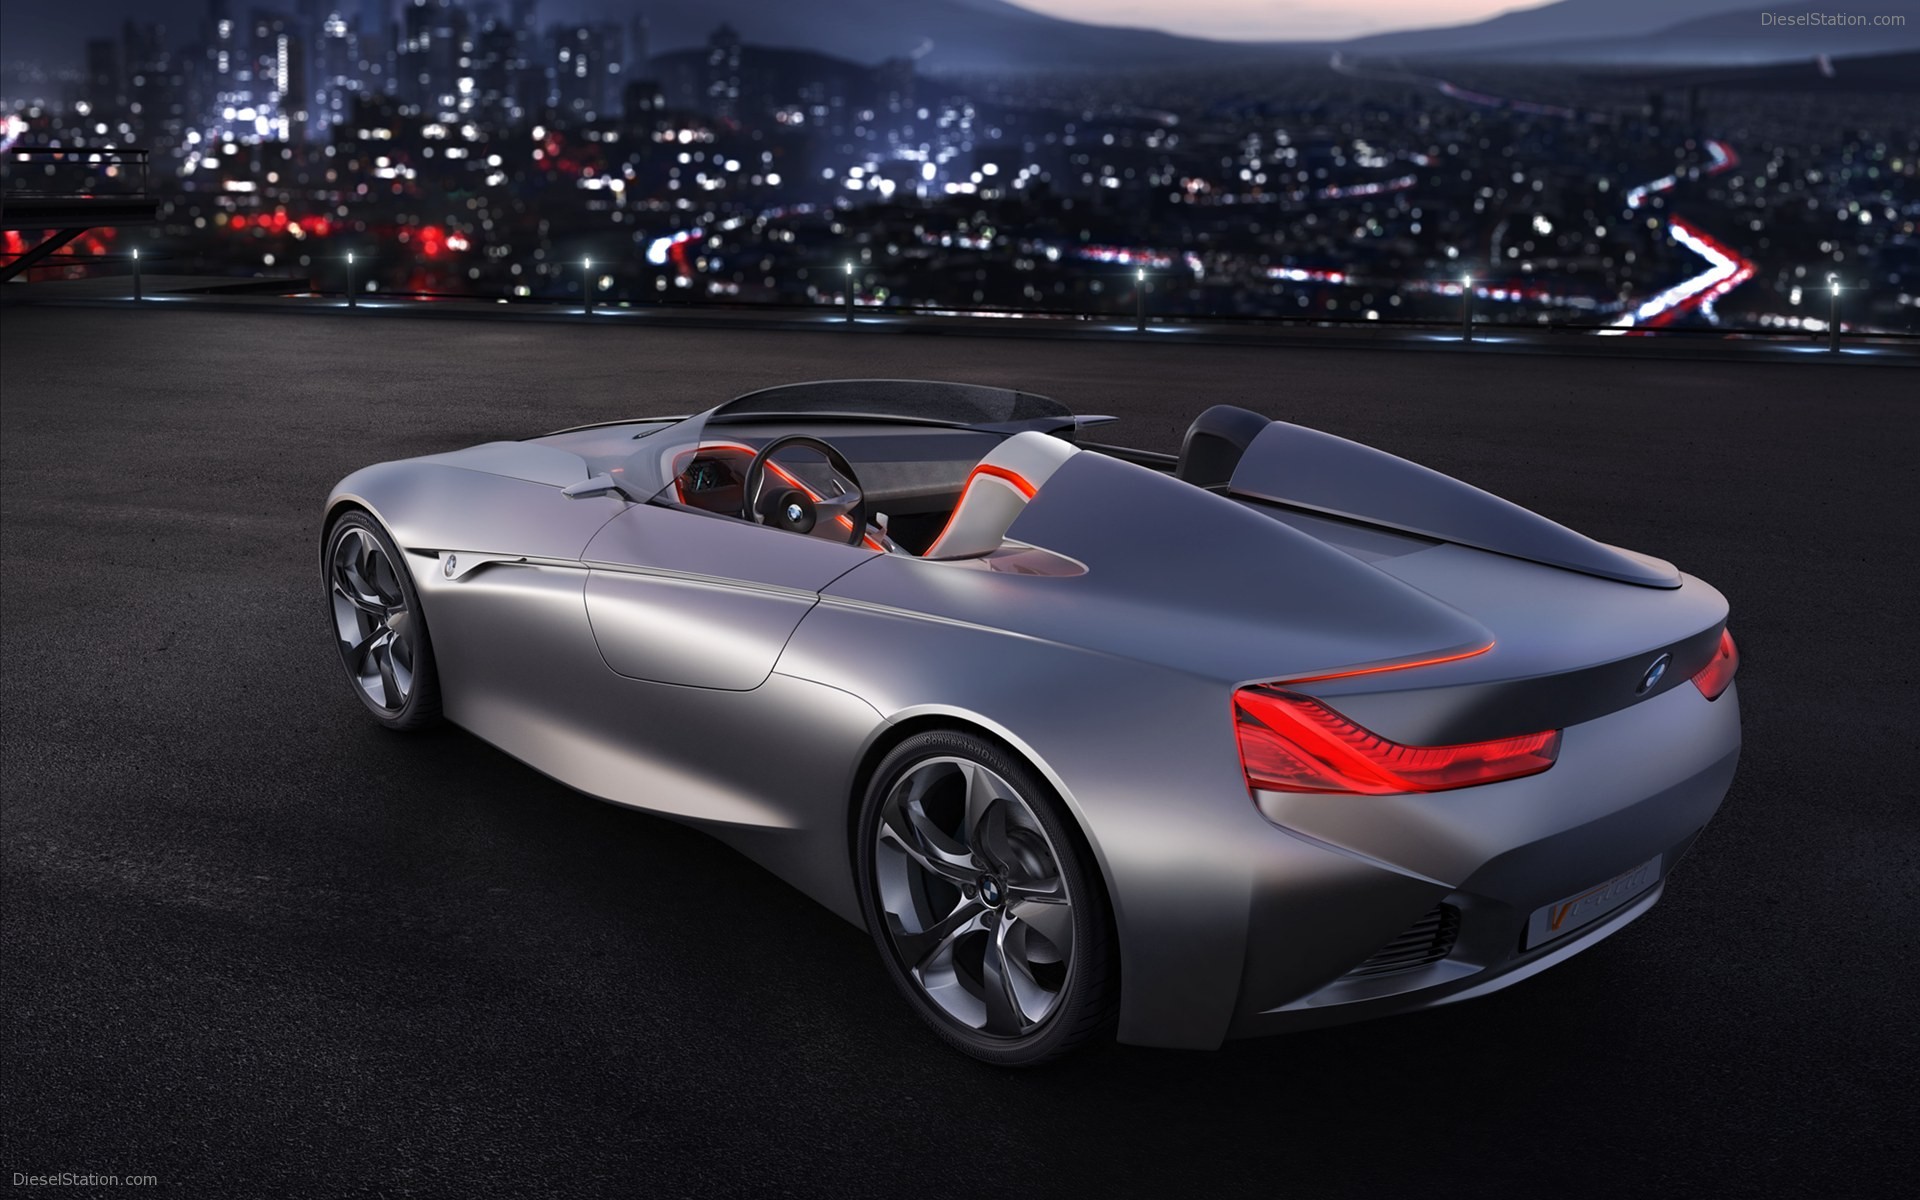  Free download BMW Wallpapers Widescreen wallpaper BMW Wallpapers 